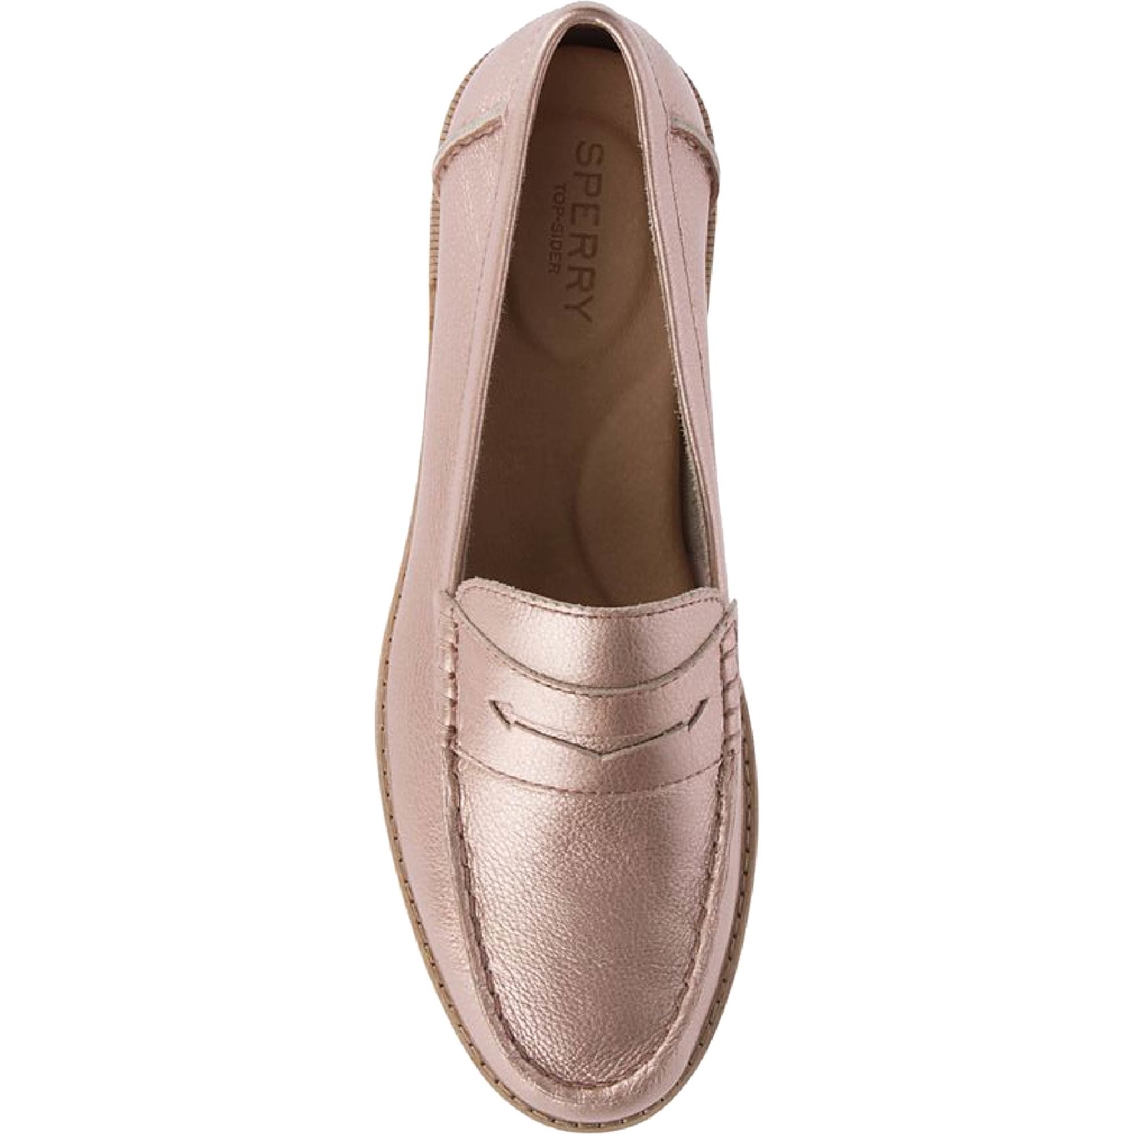 Sperry Women's Seaport Penny Loafers - Image 5 of 6